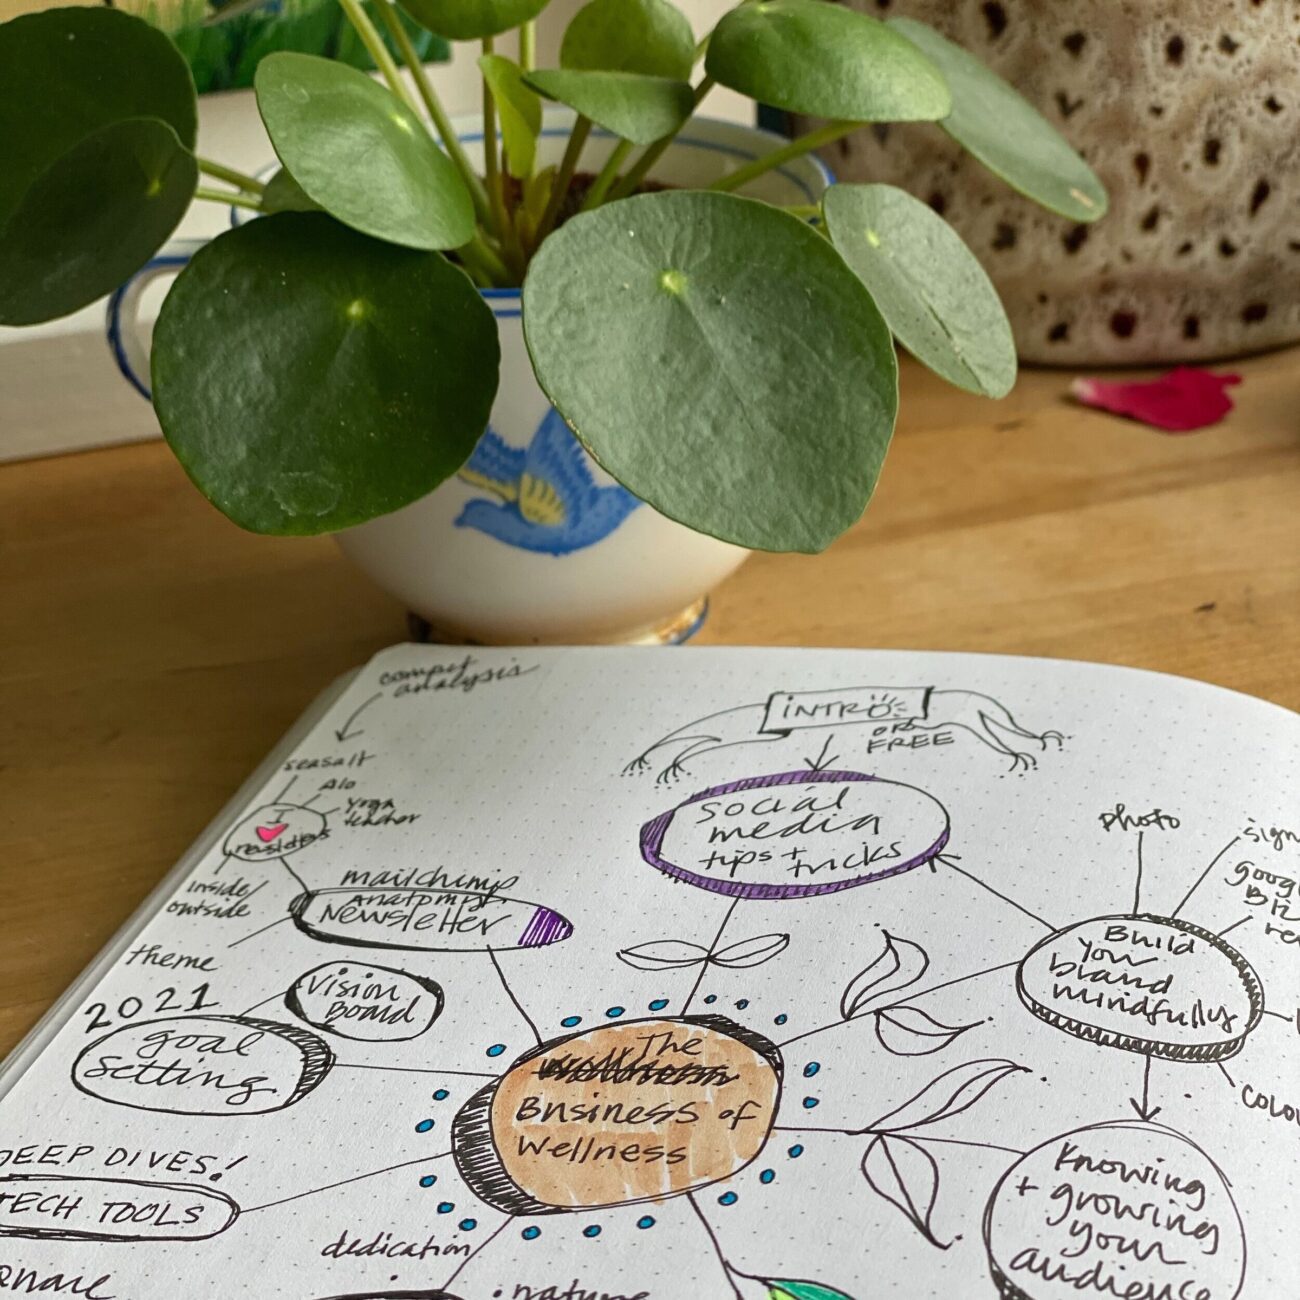 We'll take a look at mind maps online and how you can use them for your business. Here's everything you need to know.